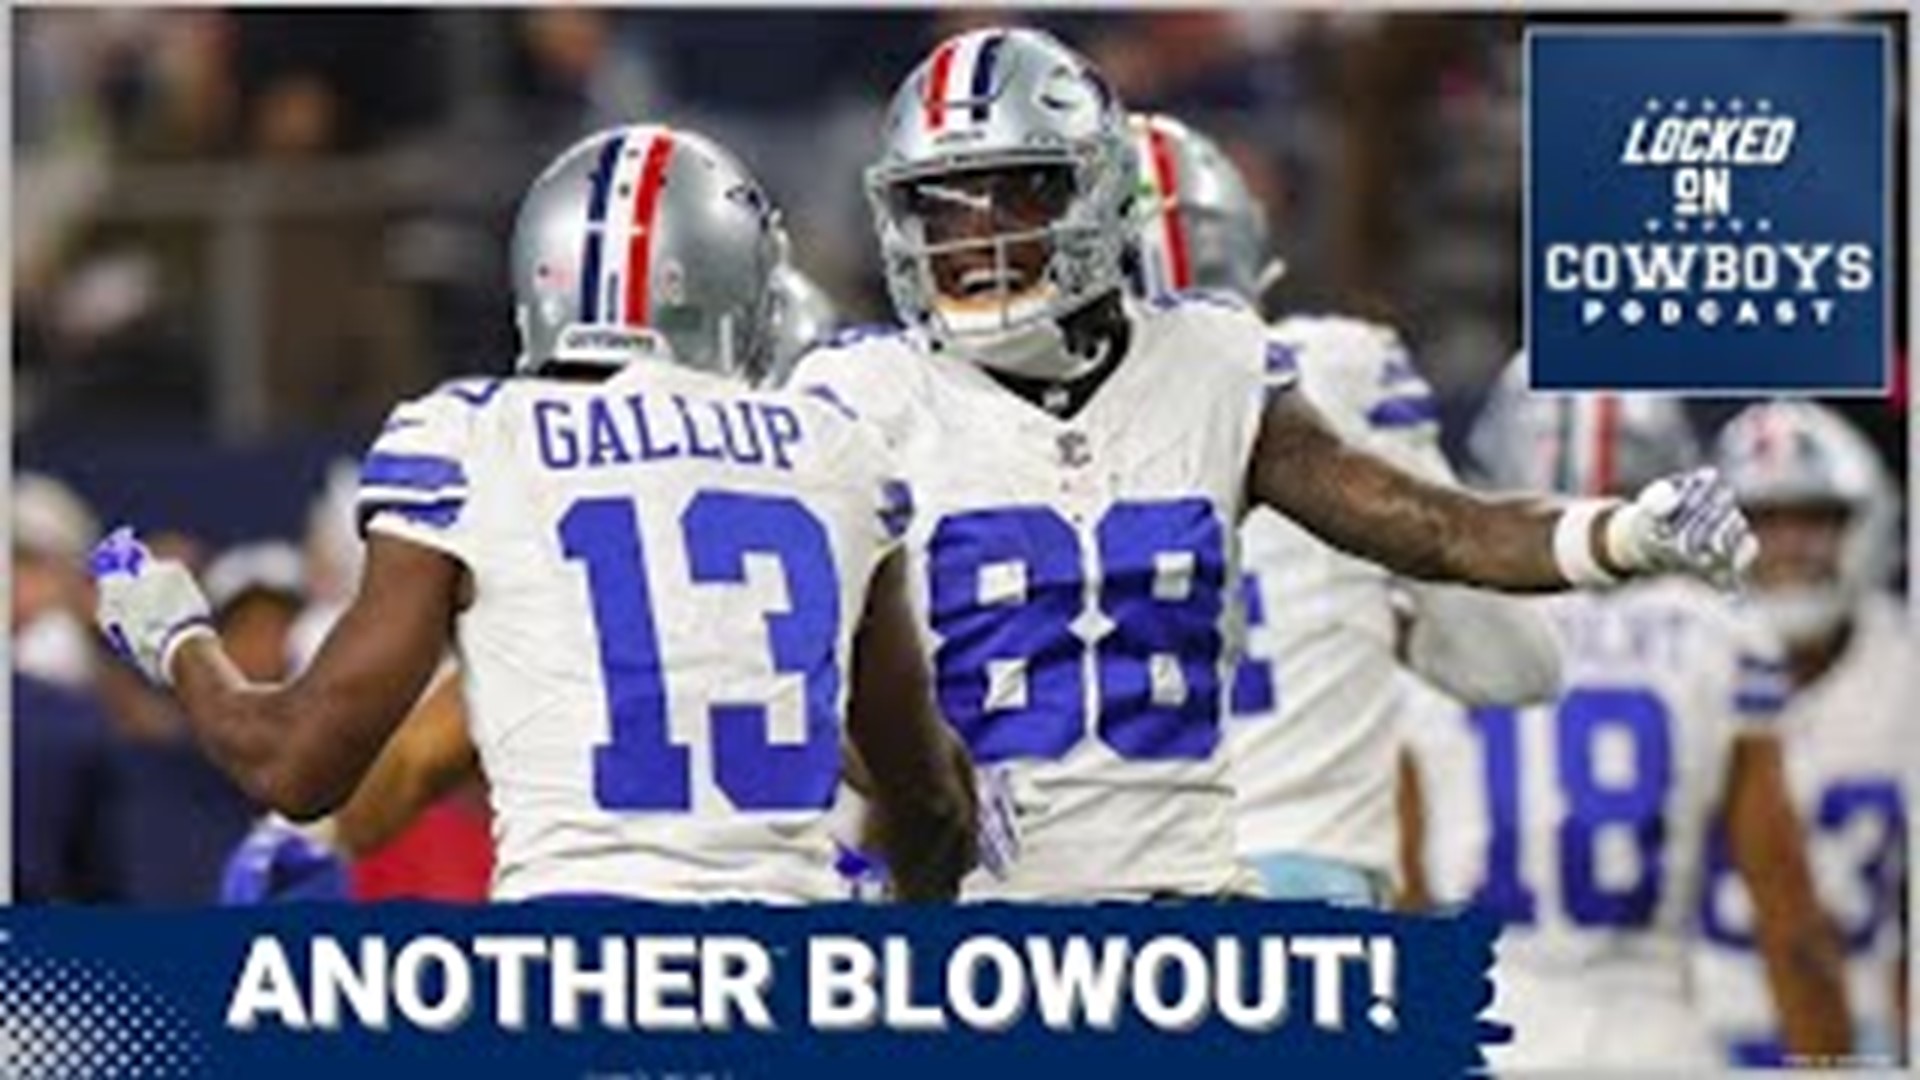 The Dallas Cowboys got another blowout win over the New York Giants, 49-17. How much can we take away from this win and what does it tell us about the Cowboys.